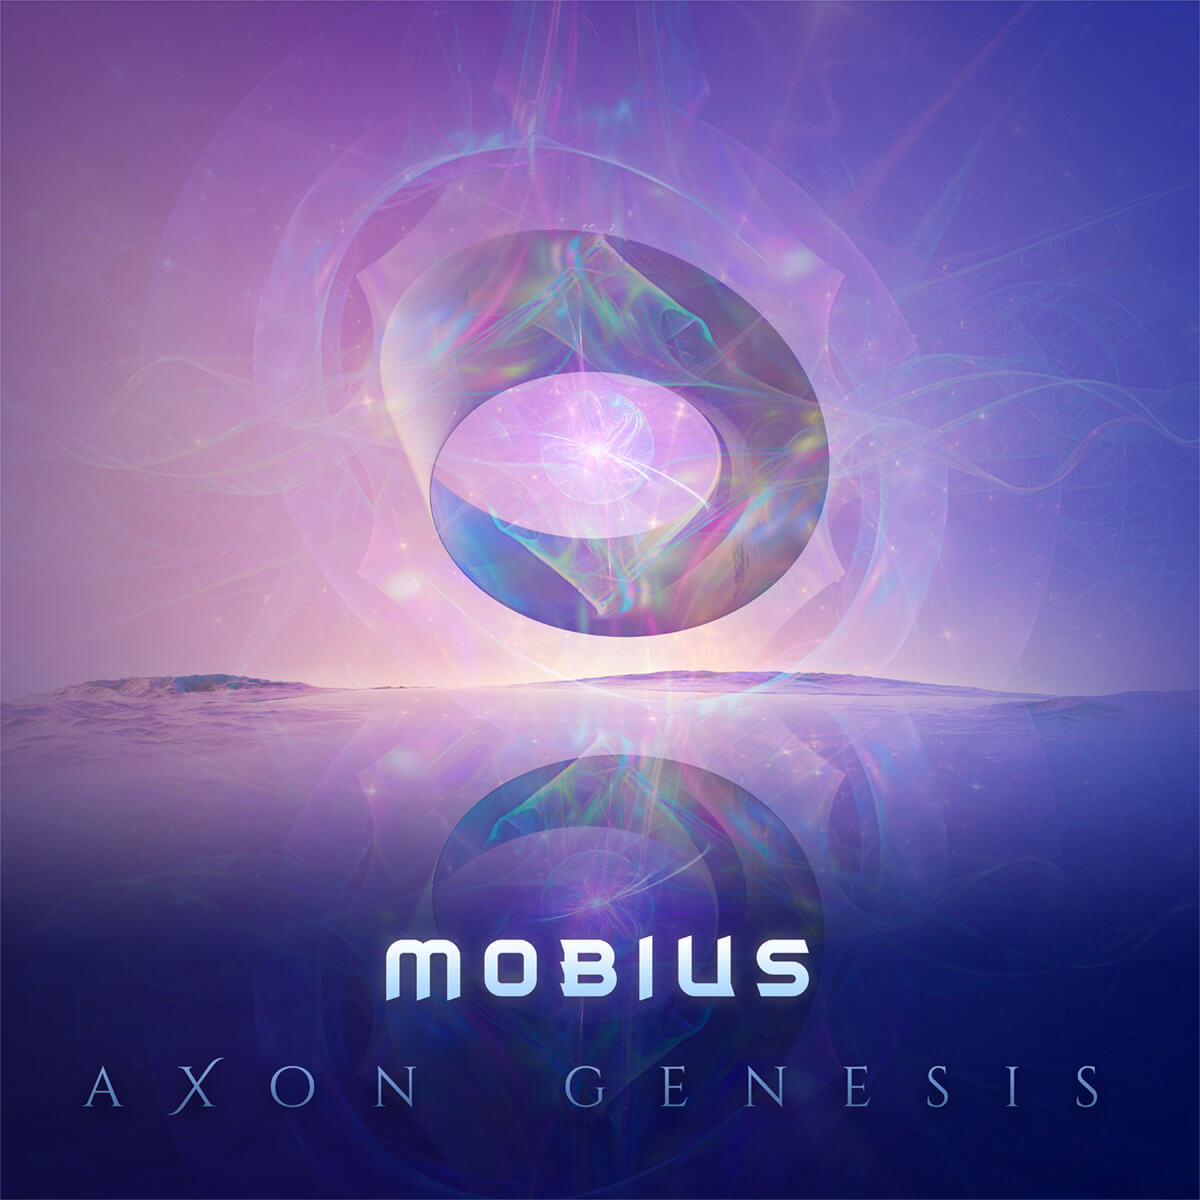 Mobius Music and Cover Art by Axon Genesis